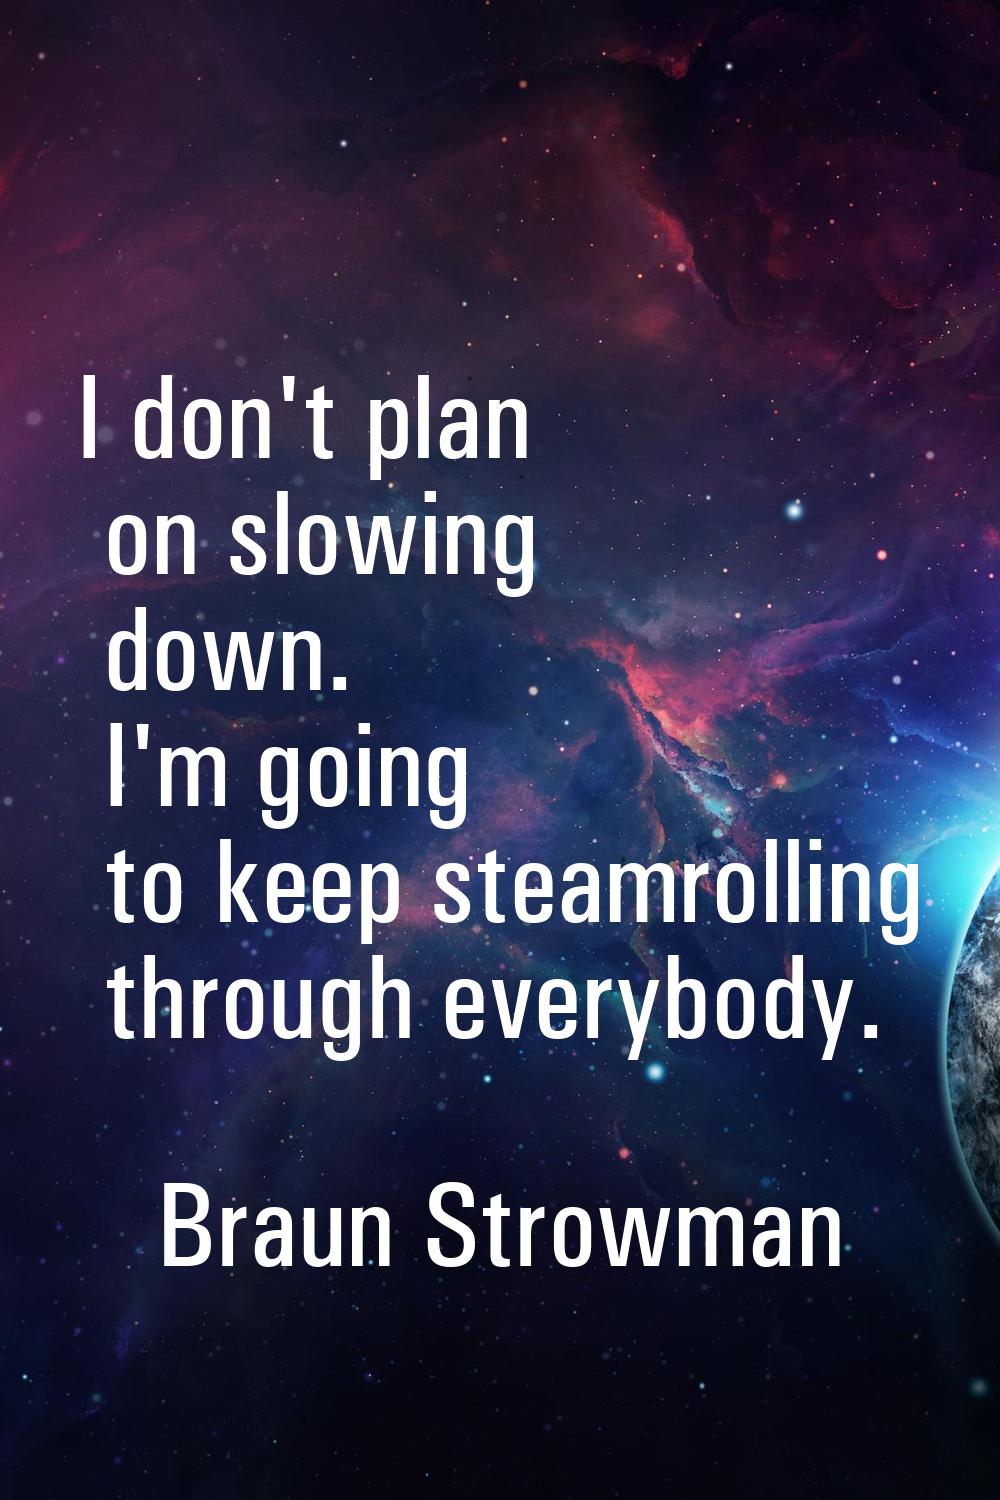 I don't plan on slowing down. I'm going to keep steamrolling through everybody.